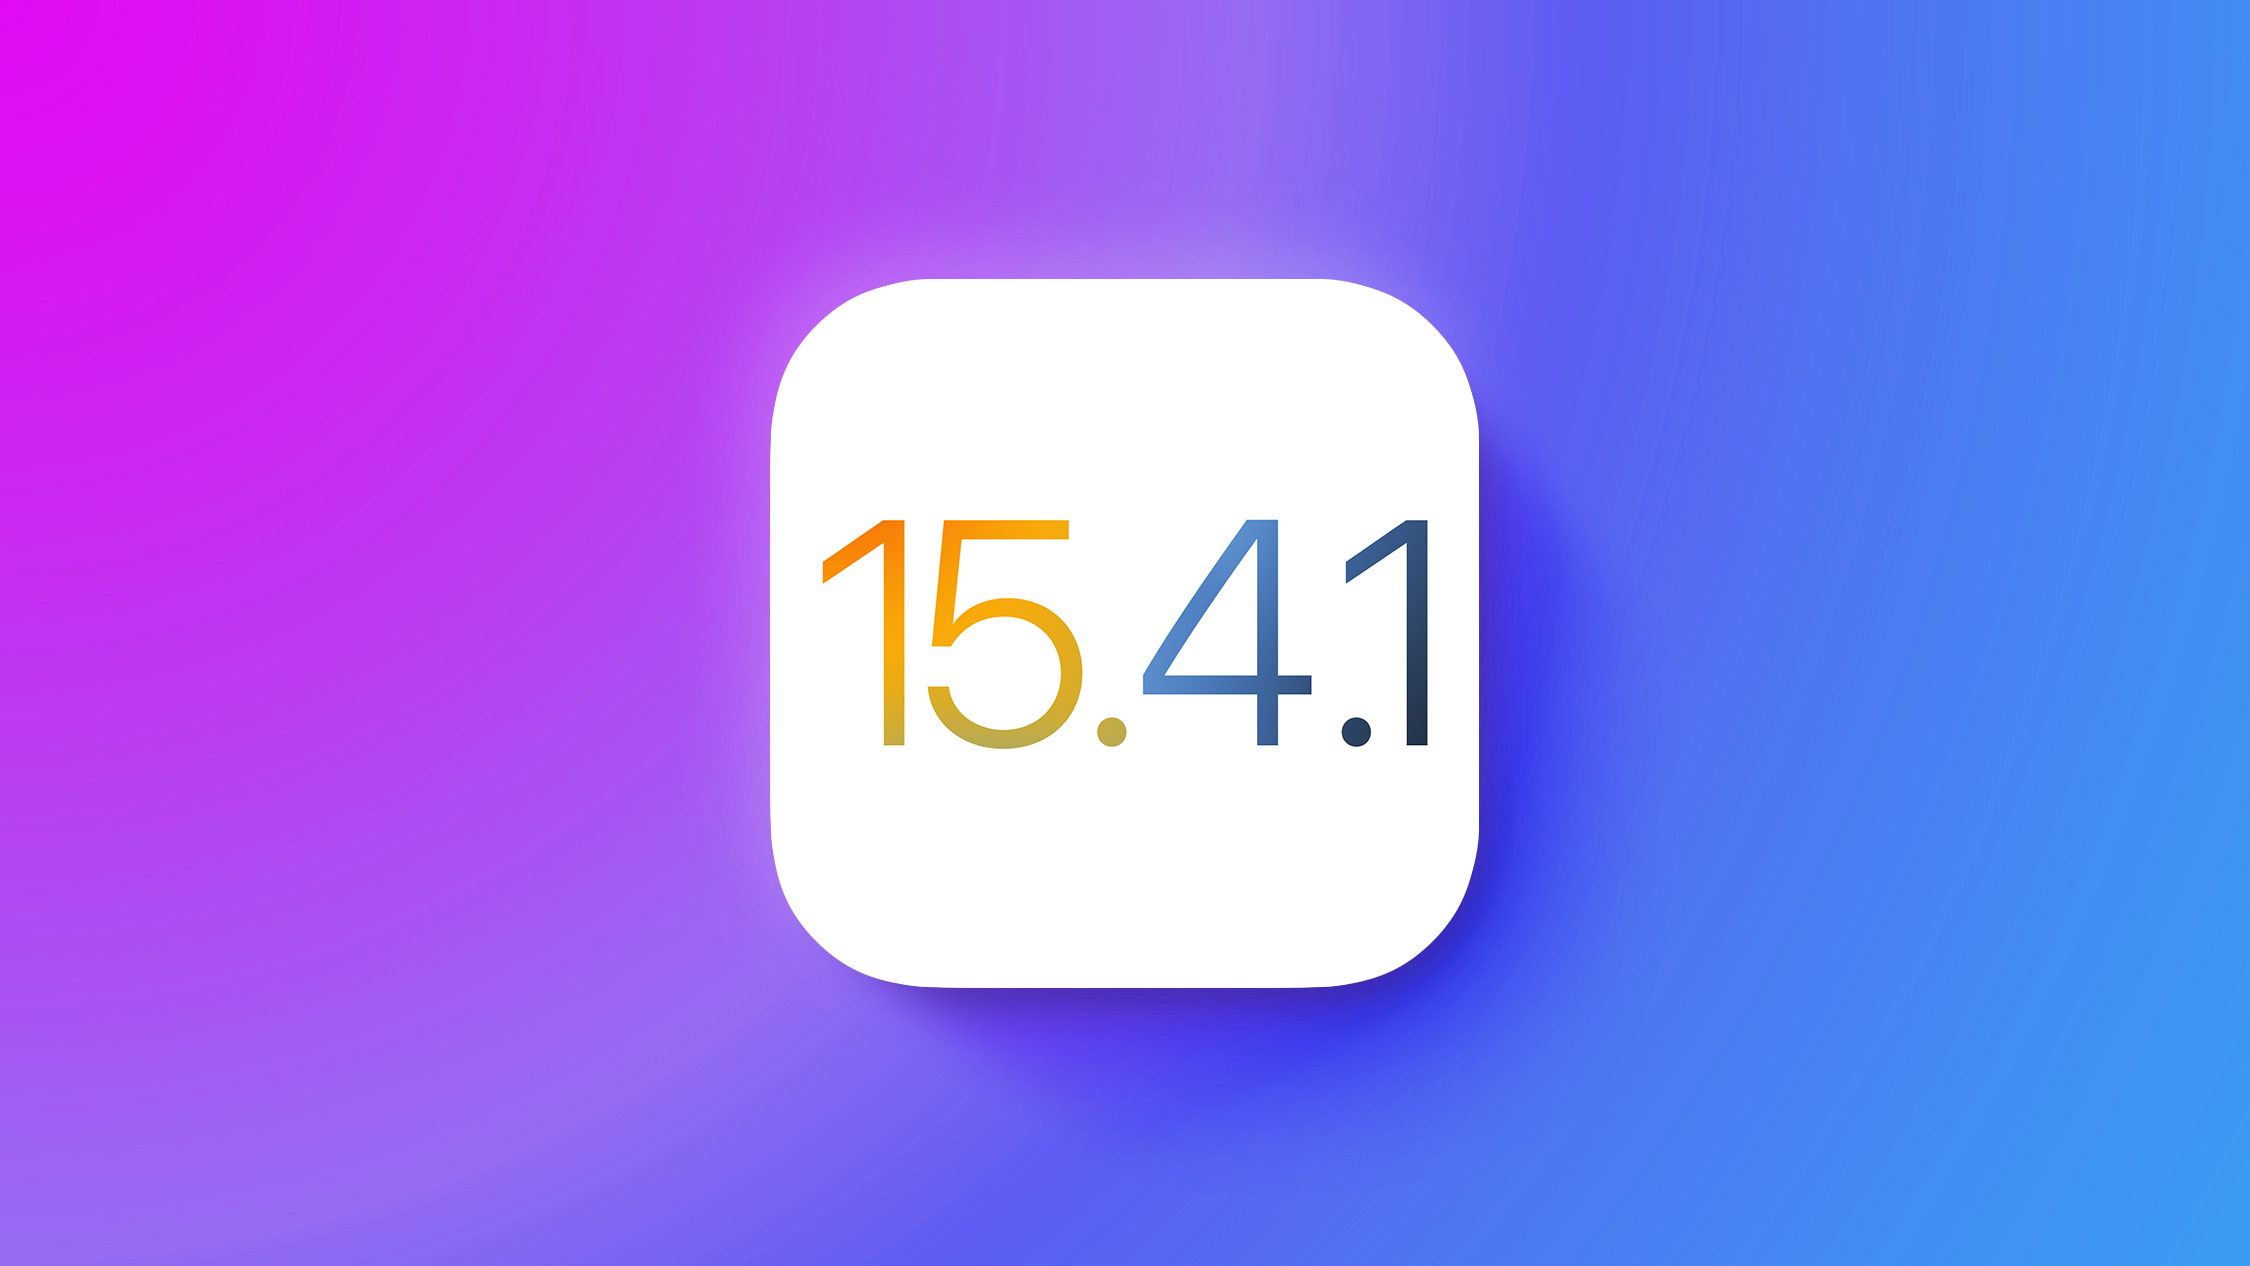 Apple Stops Signing iOS 15.4 Following iOS 15.4.1 Release, Downgrading No Longer Possible